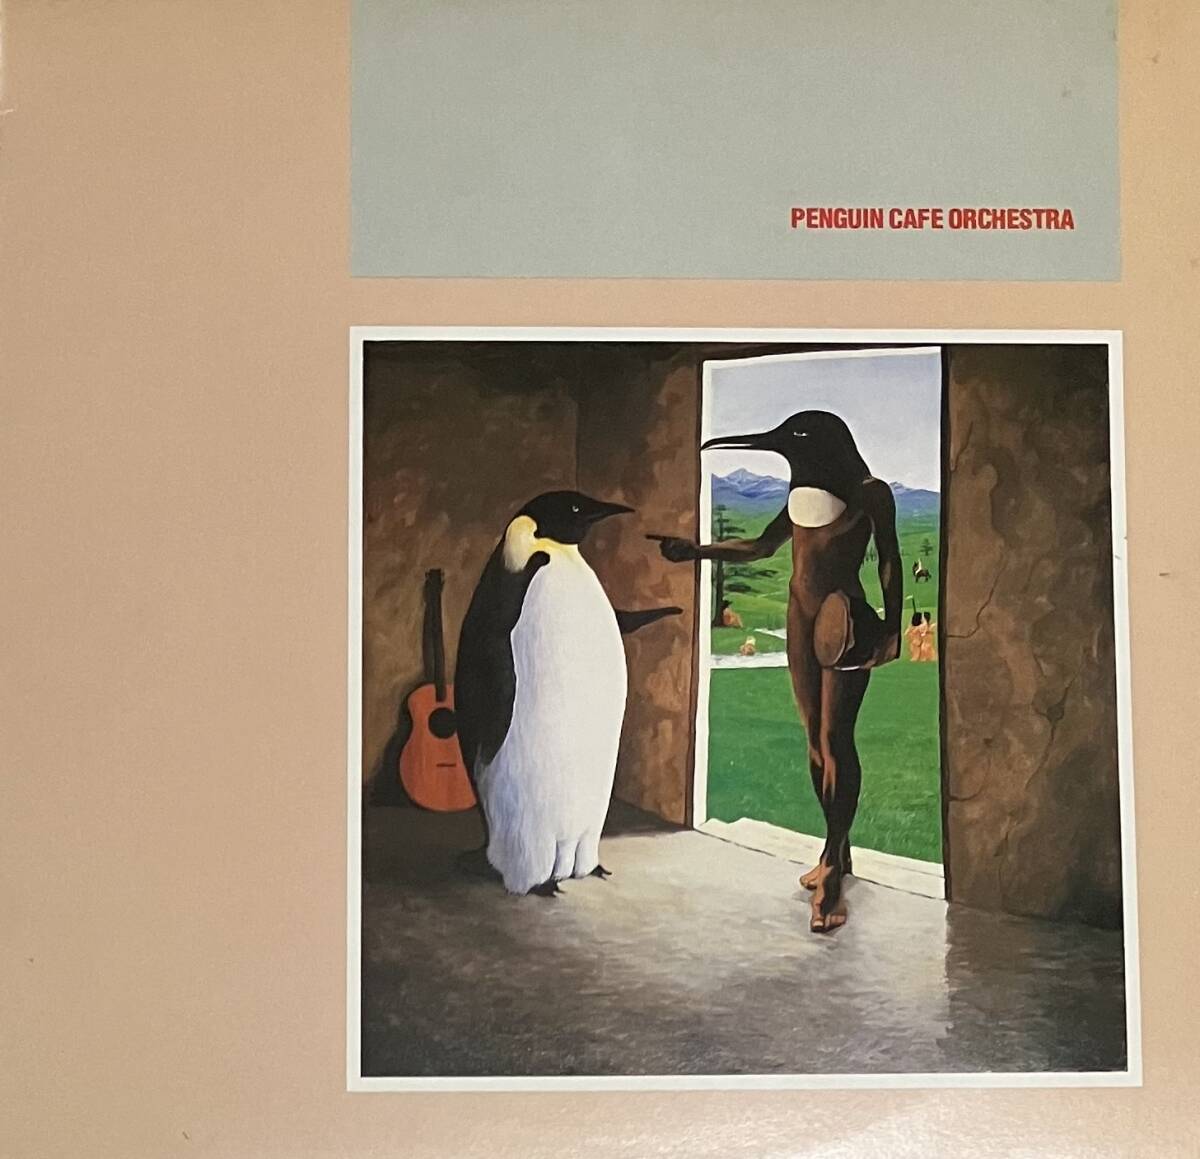 [ LP / レコード ] Penguin Cafe Orchestra / Penguin Cafe Orchestra ( Modern Classical ) Editions EG - 28MM 0065 クラシカル ミニマル_画像1